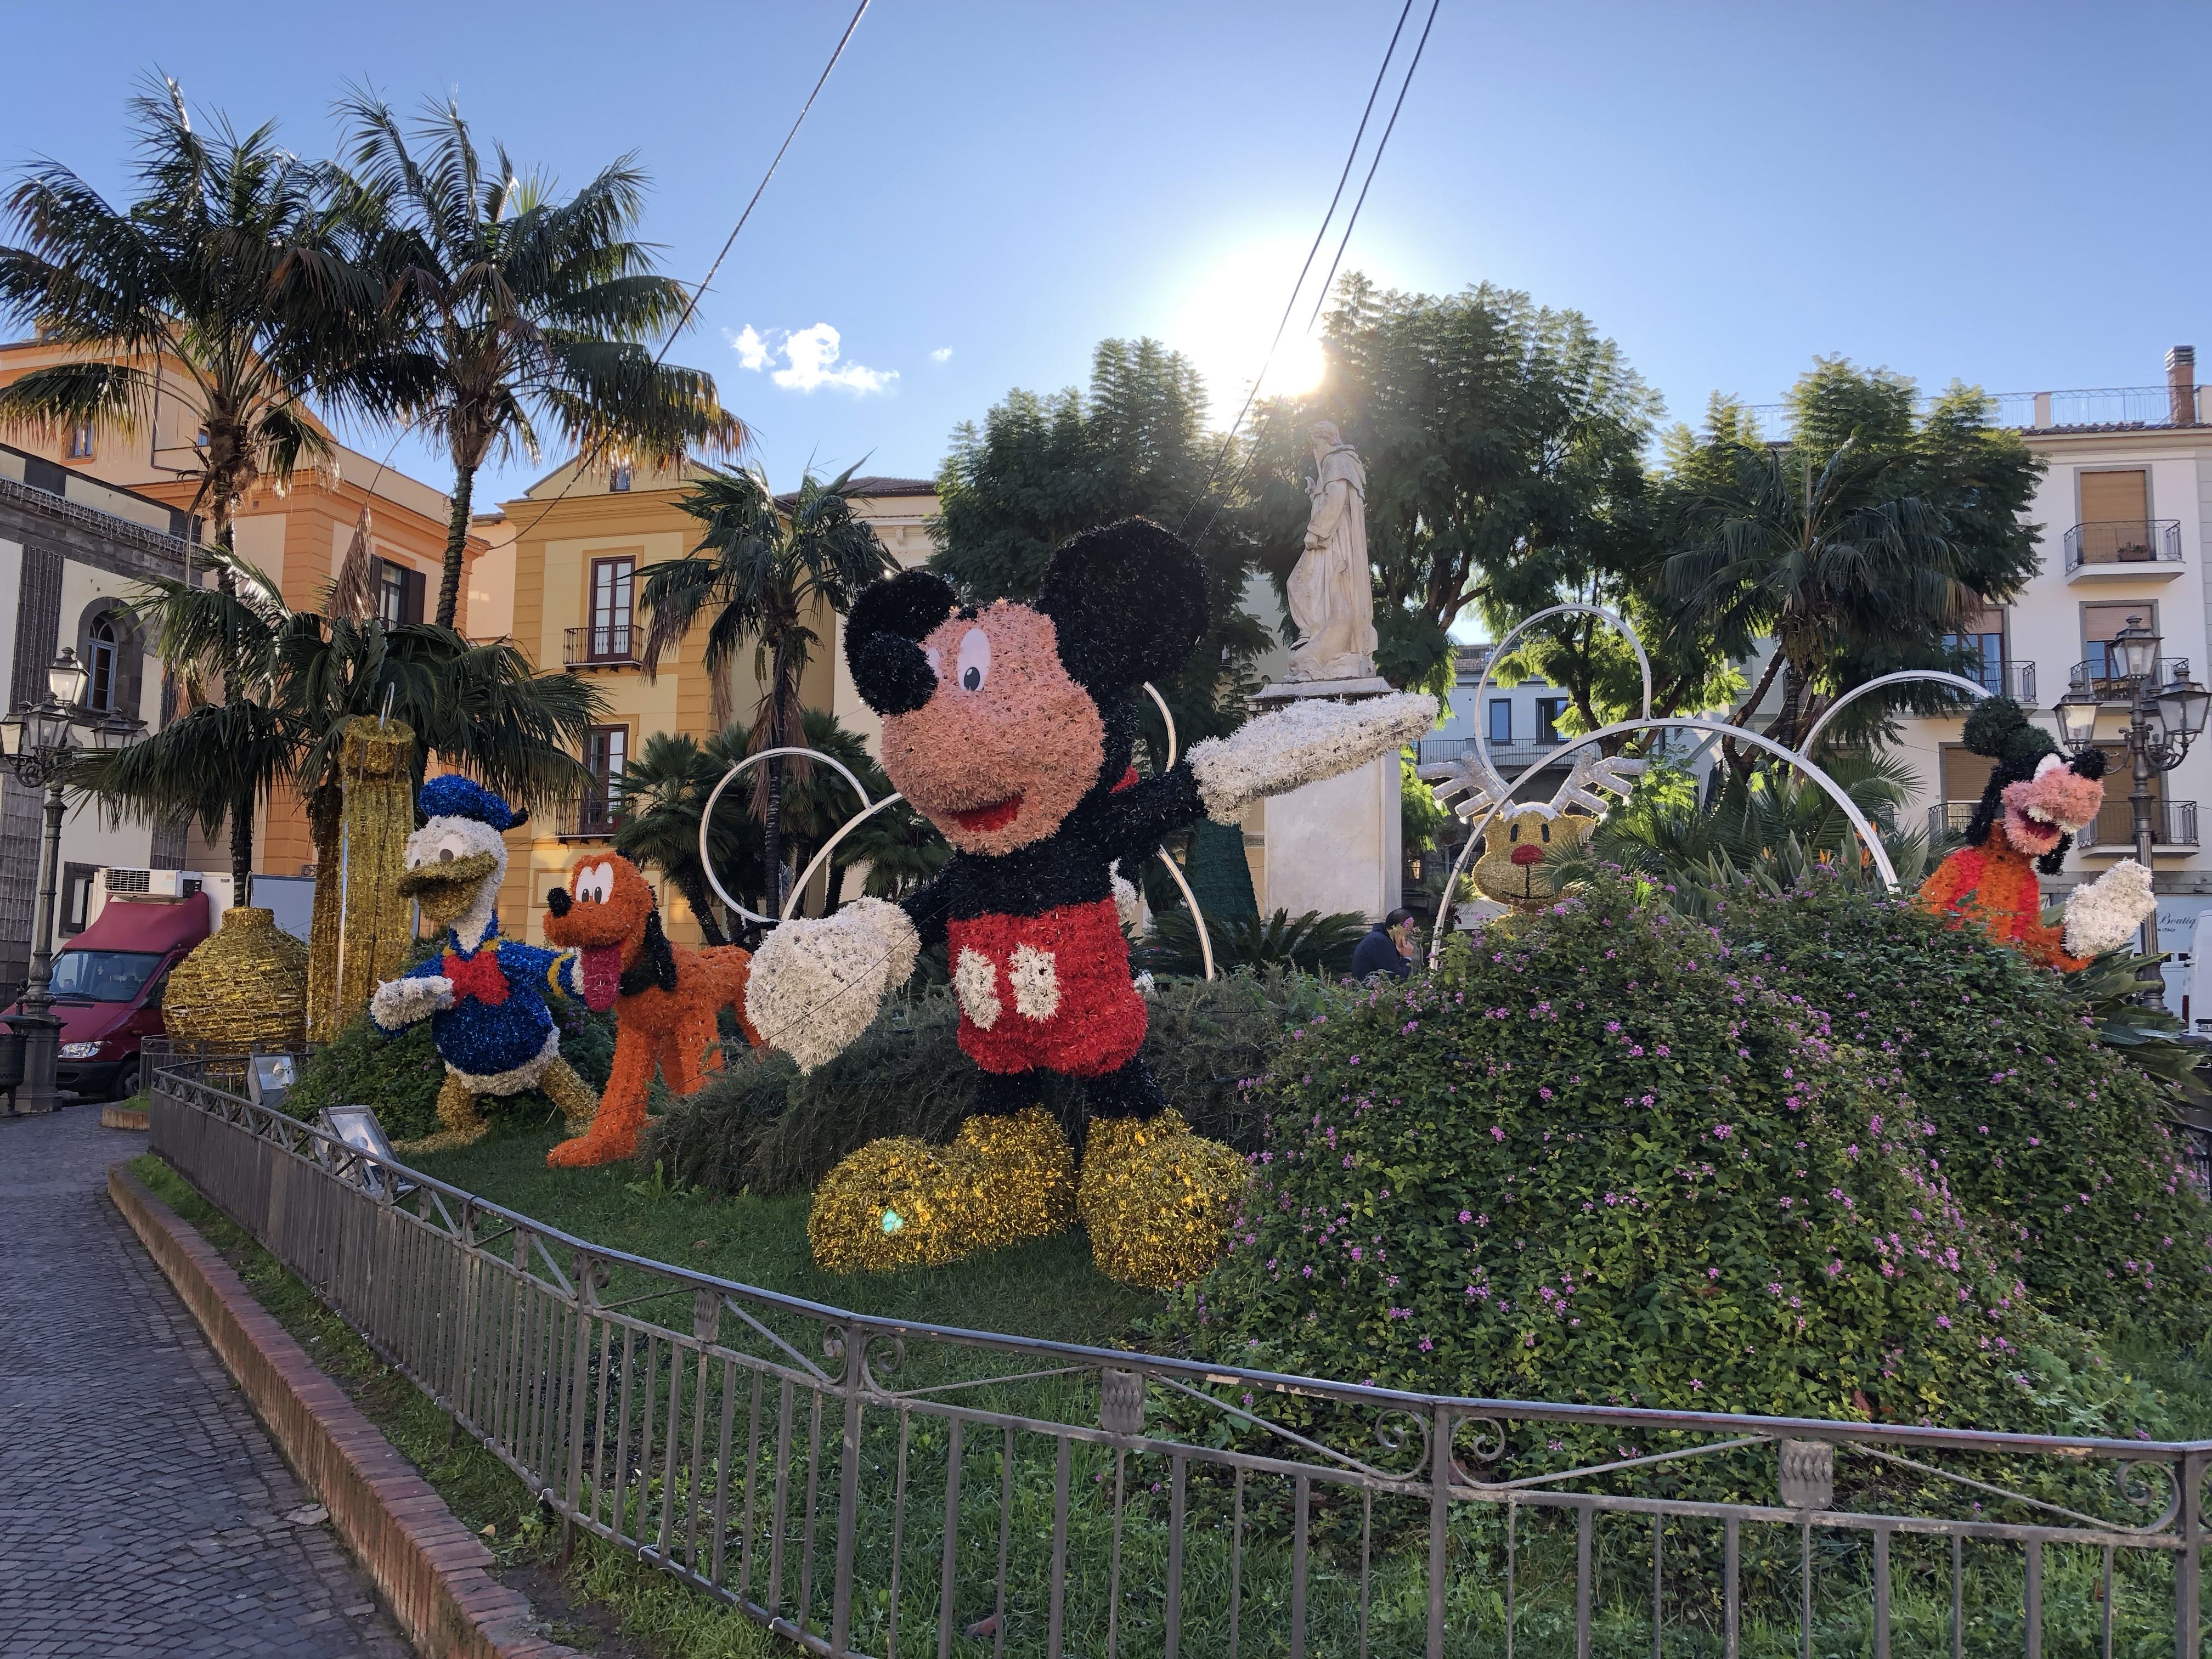 A fenced garden in Sorrento surrounded by cobbled pathways.  Completely non-infringing figures of Mickey Mouse, Donald Duck, Pluto and Goofy can be seen among the bushes.